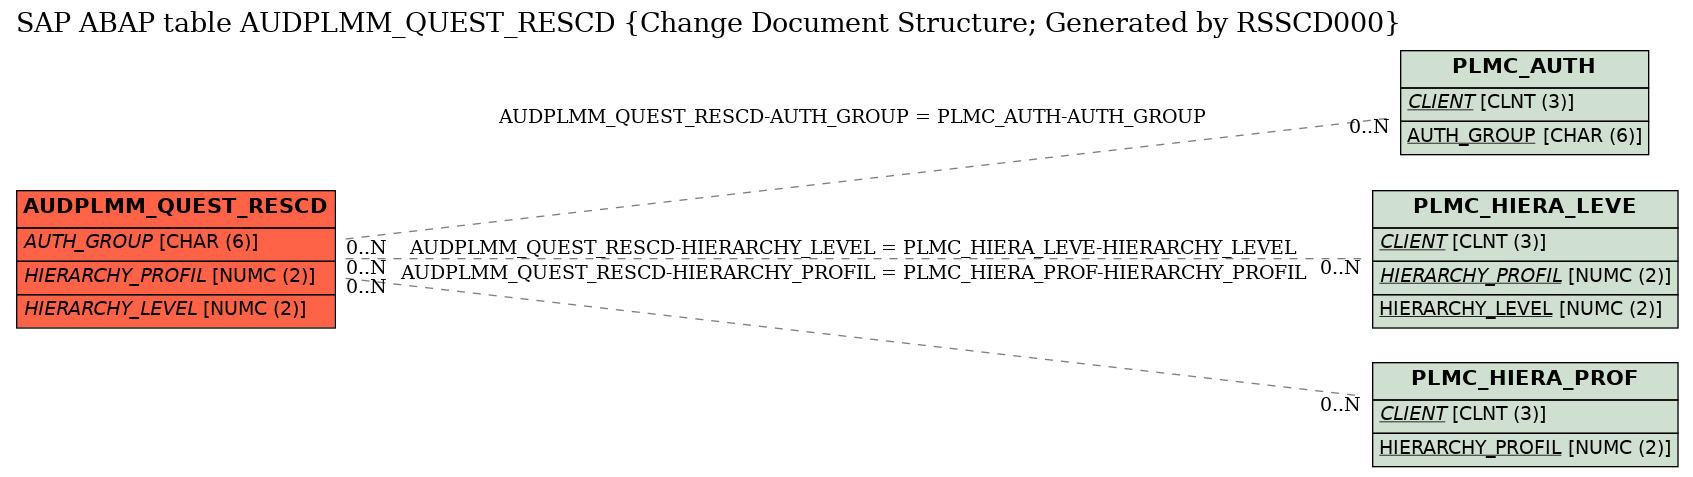 E-R Diagram for table AUDPLMM_QUEST_RESCD (Change Document Structure; Generated by RSSCD000)